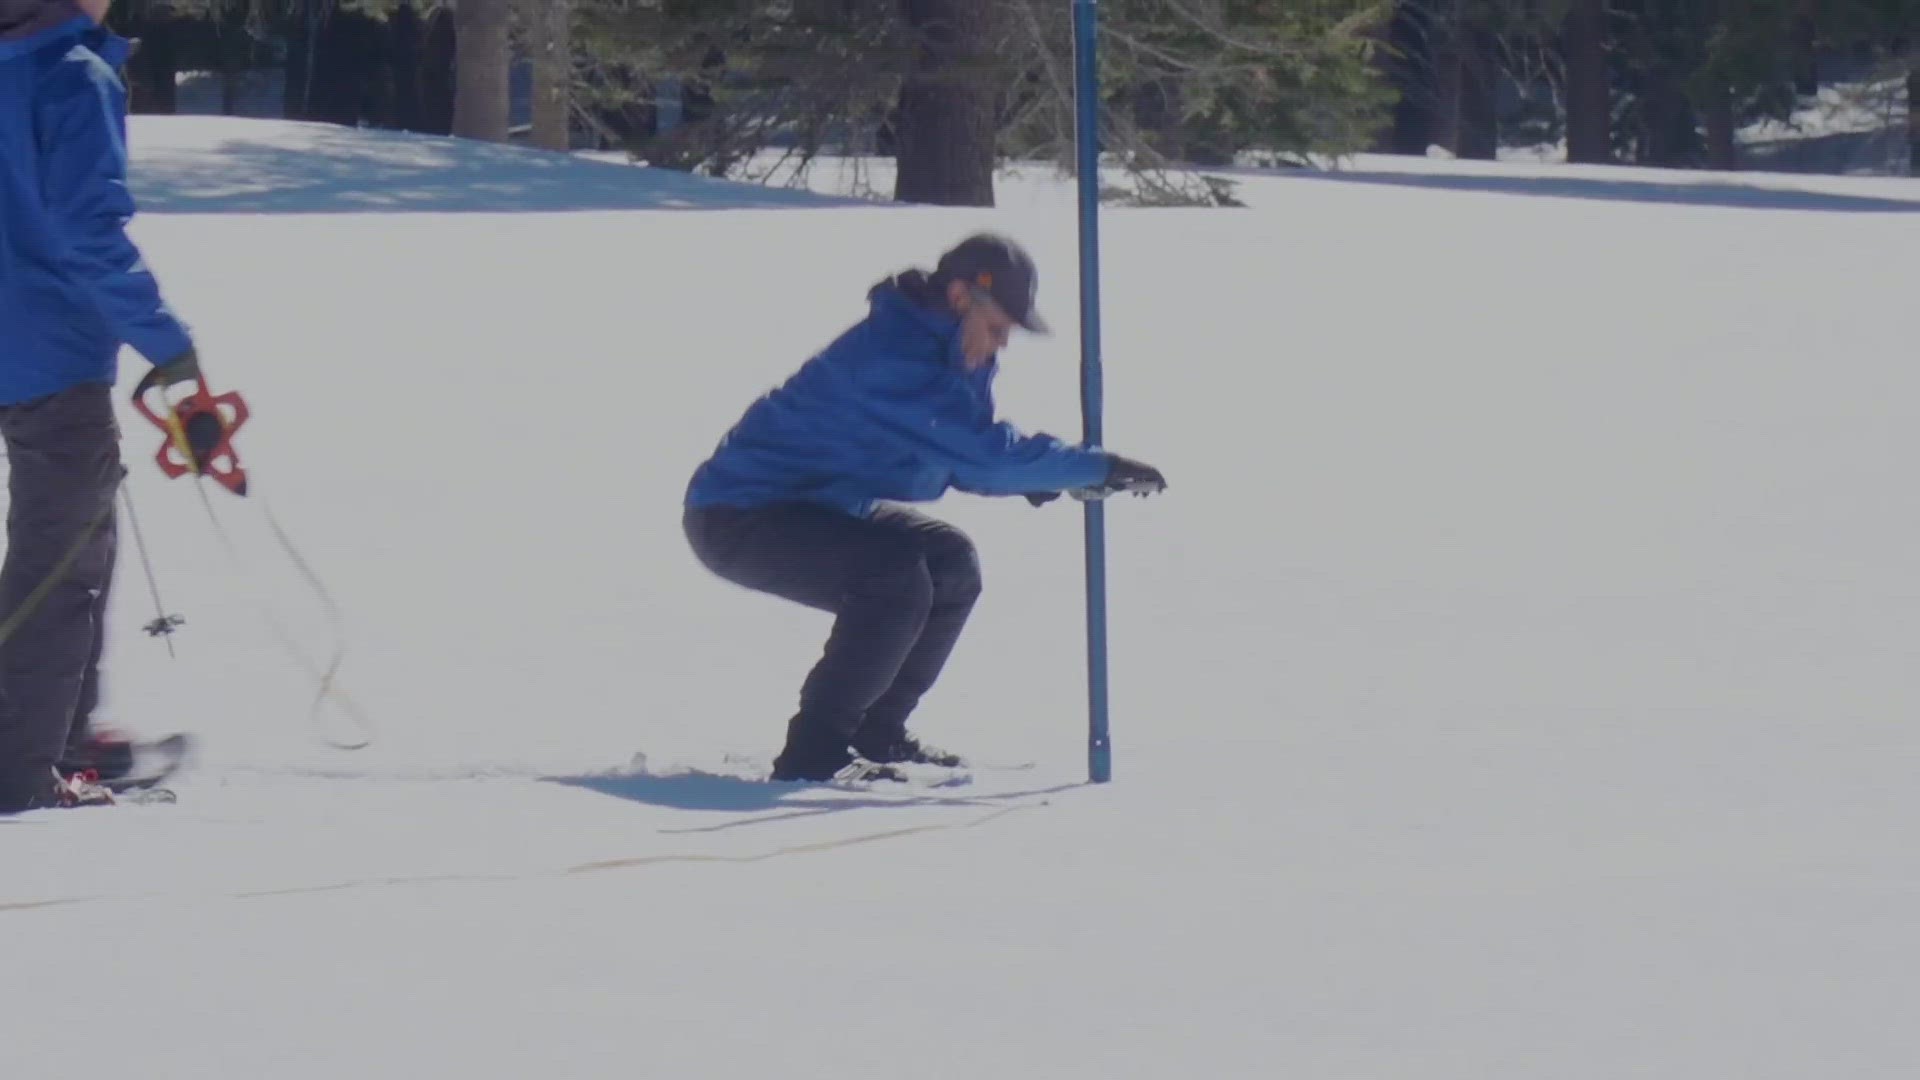 Snow survey: Statewide snowpack in excellent shape thanks to active March